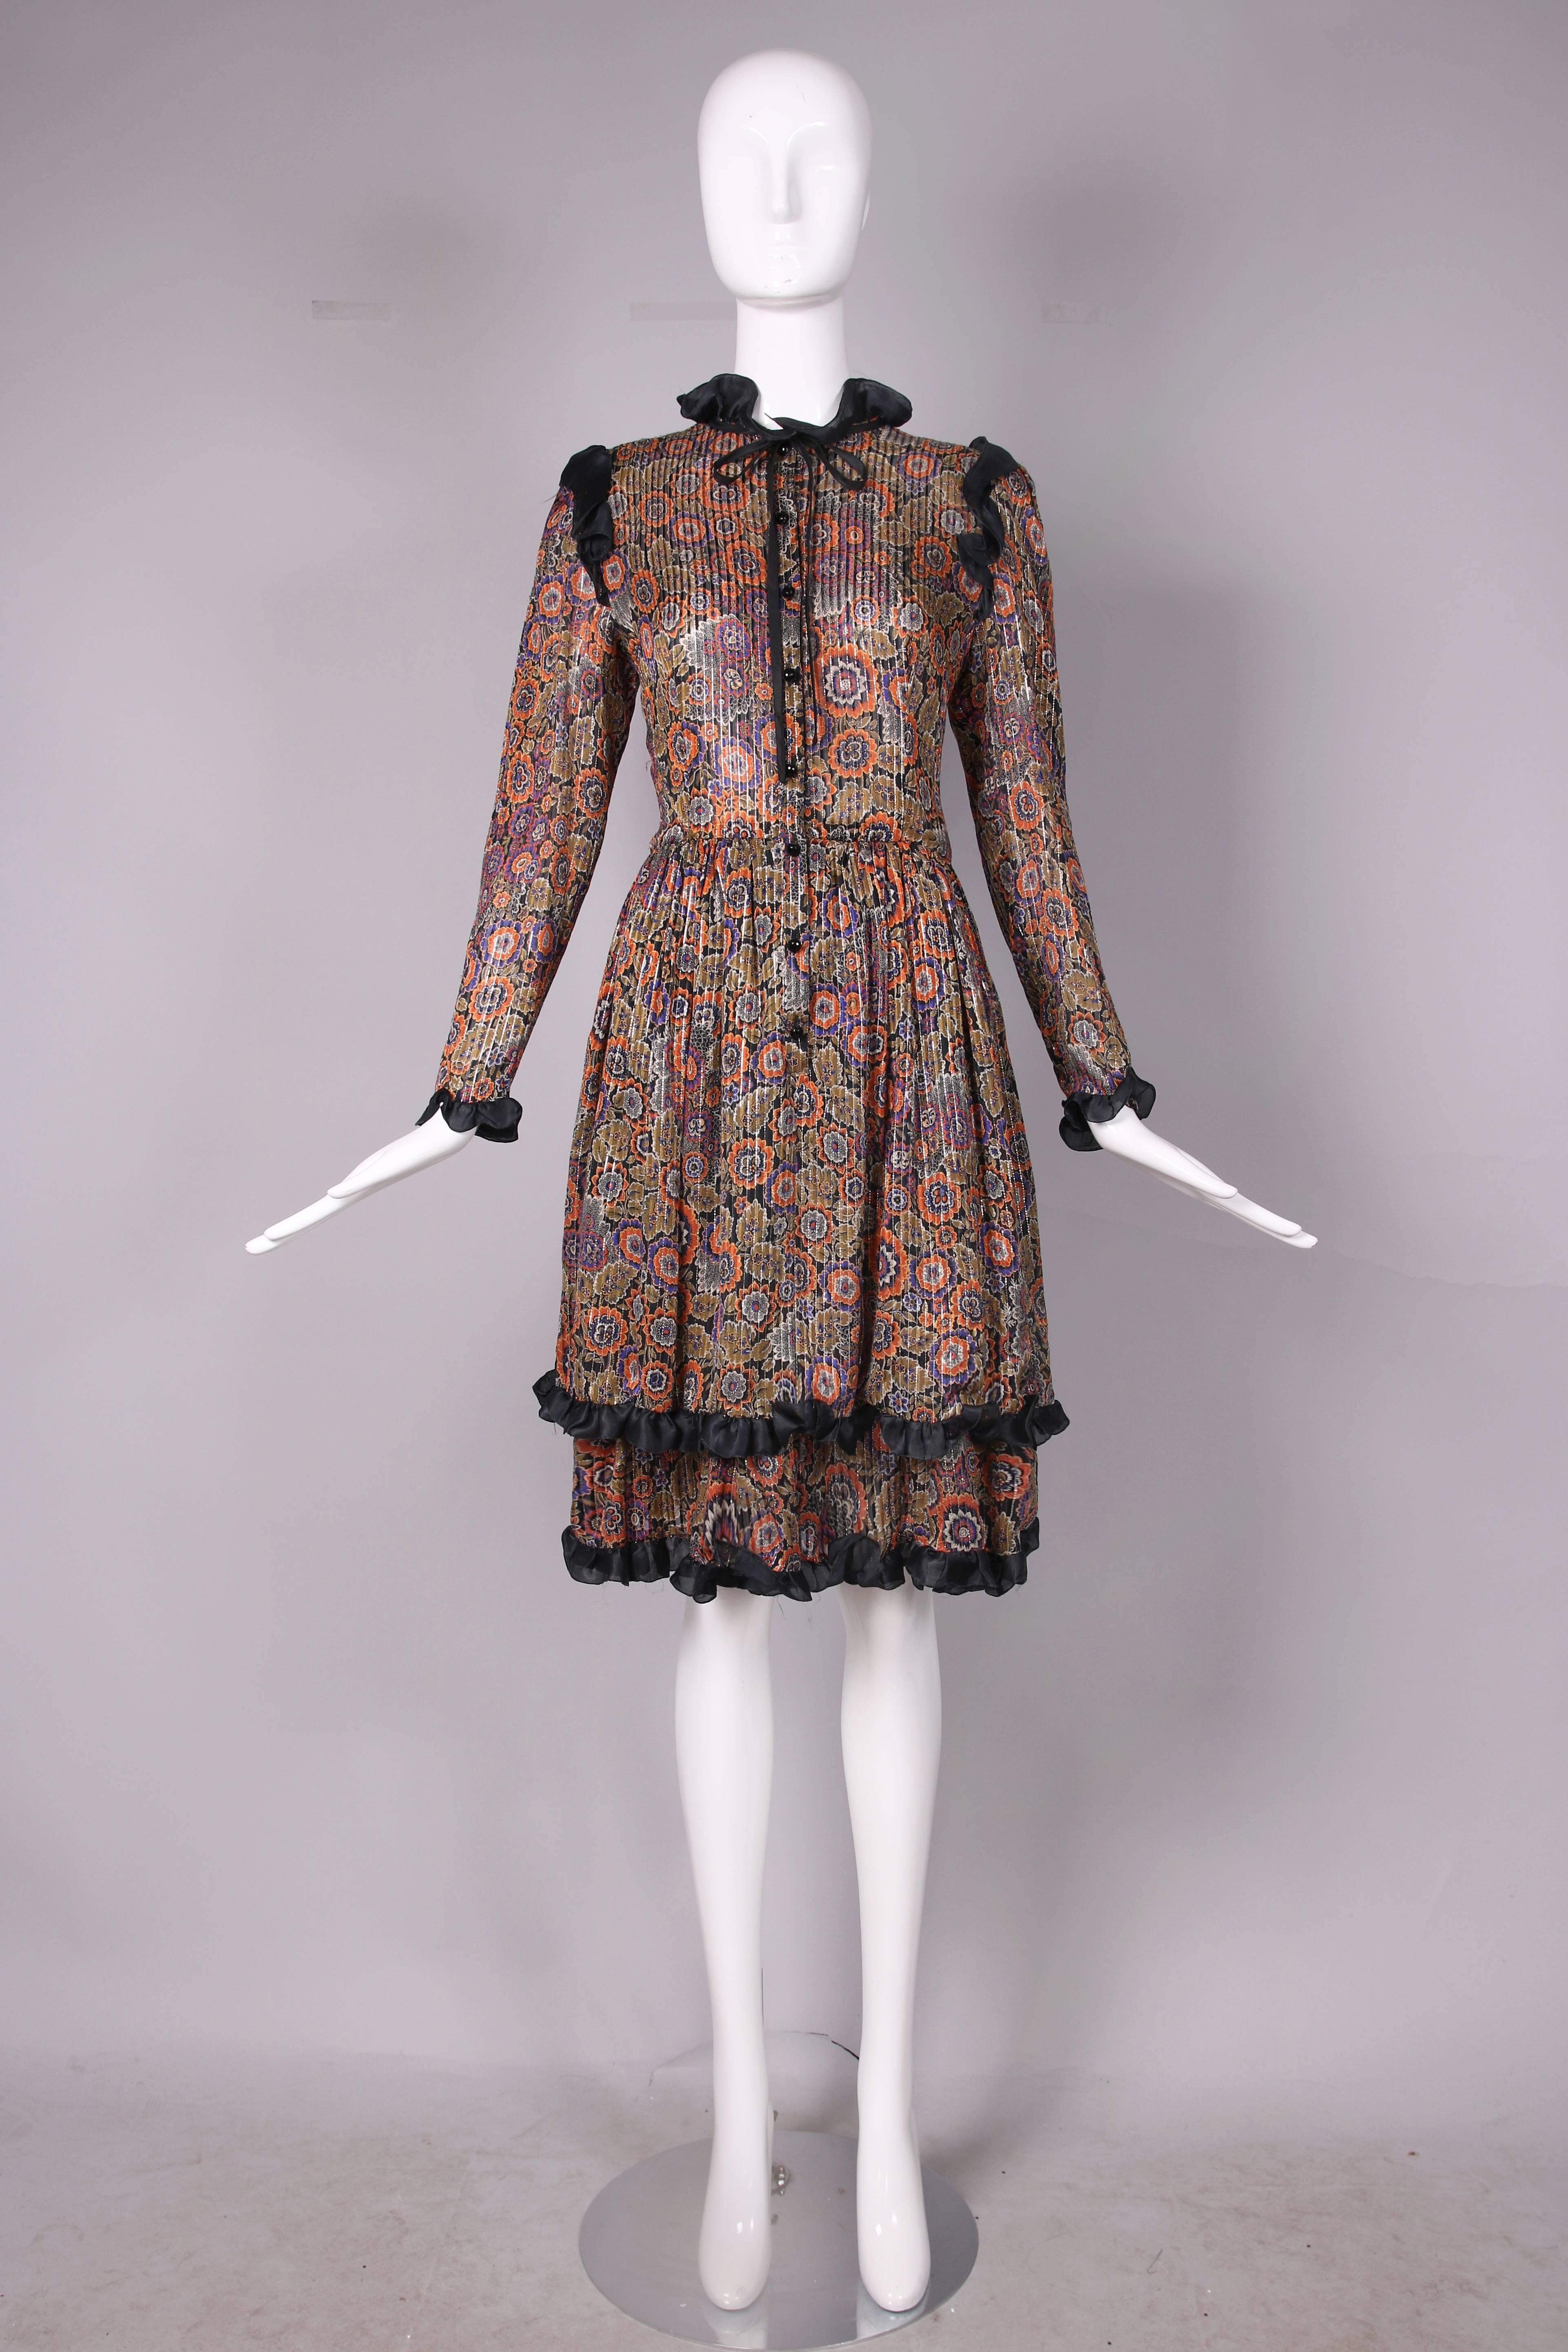 Vintage Valentino silk day dress in a black, purple, orange, white and olive floral print run through with vertical gold metallic threads. Dress features a nipped waist, tiered skirt, faceted black buttons at center front and cuffs, neck ties that